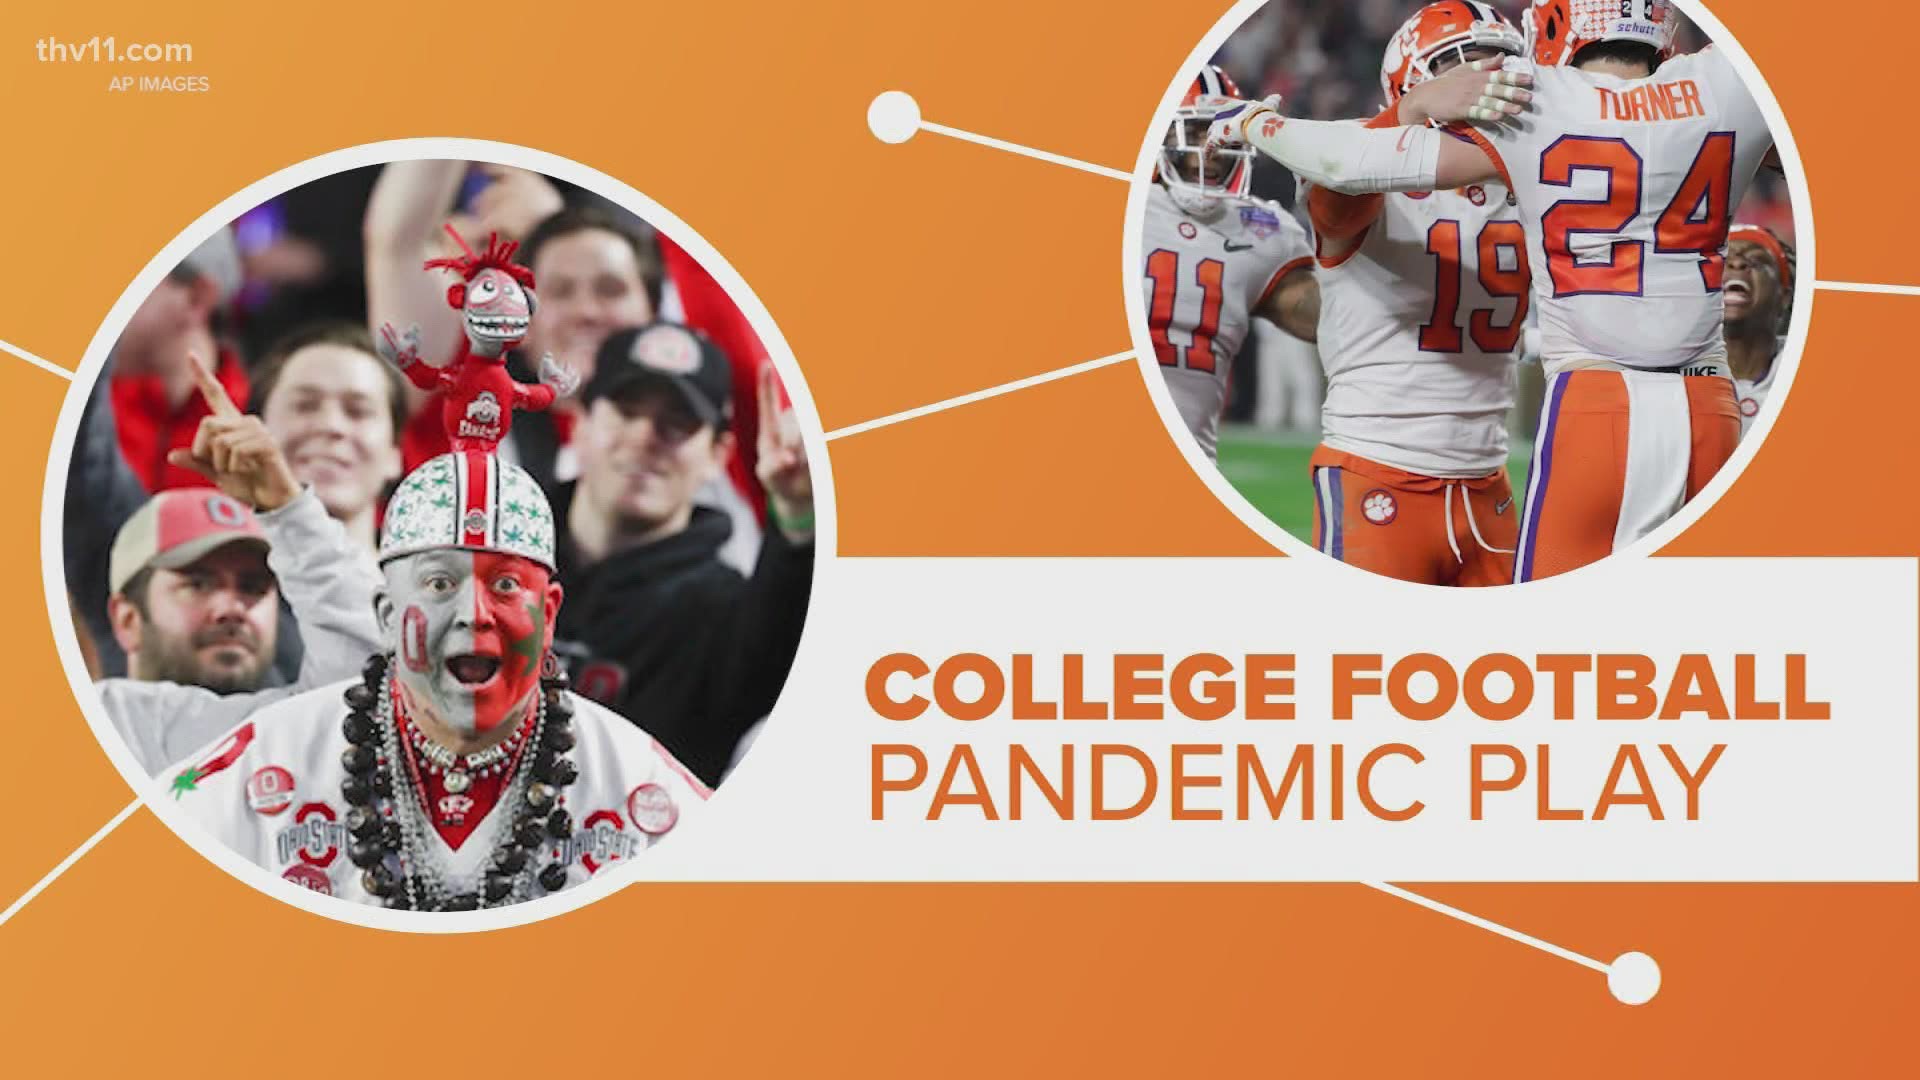 Sports are a big topic lately during the pandemic, especially college football. But the decision to play is very different for college versus professional.